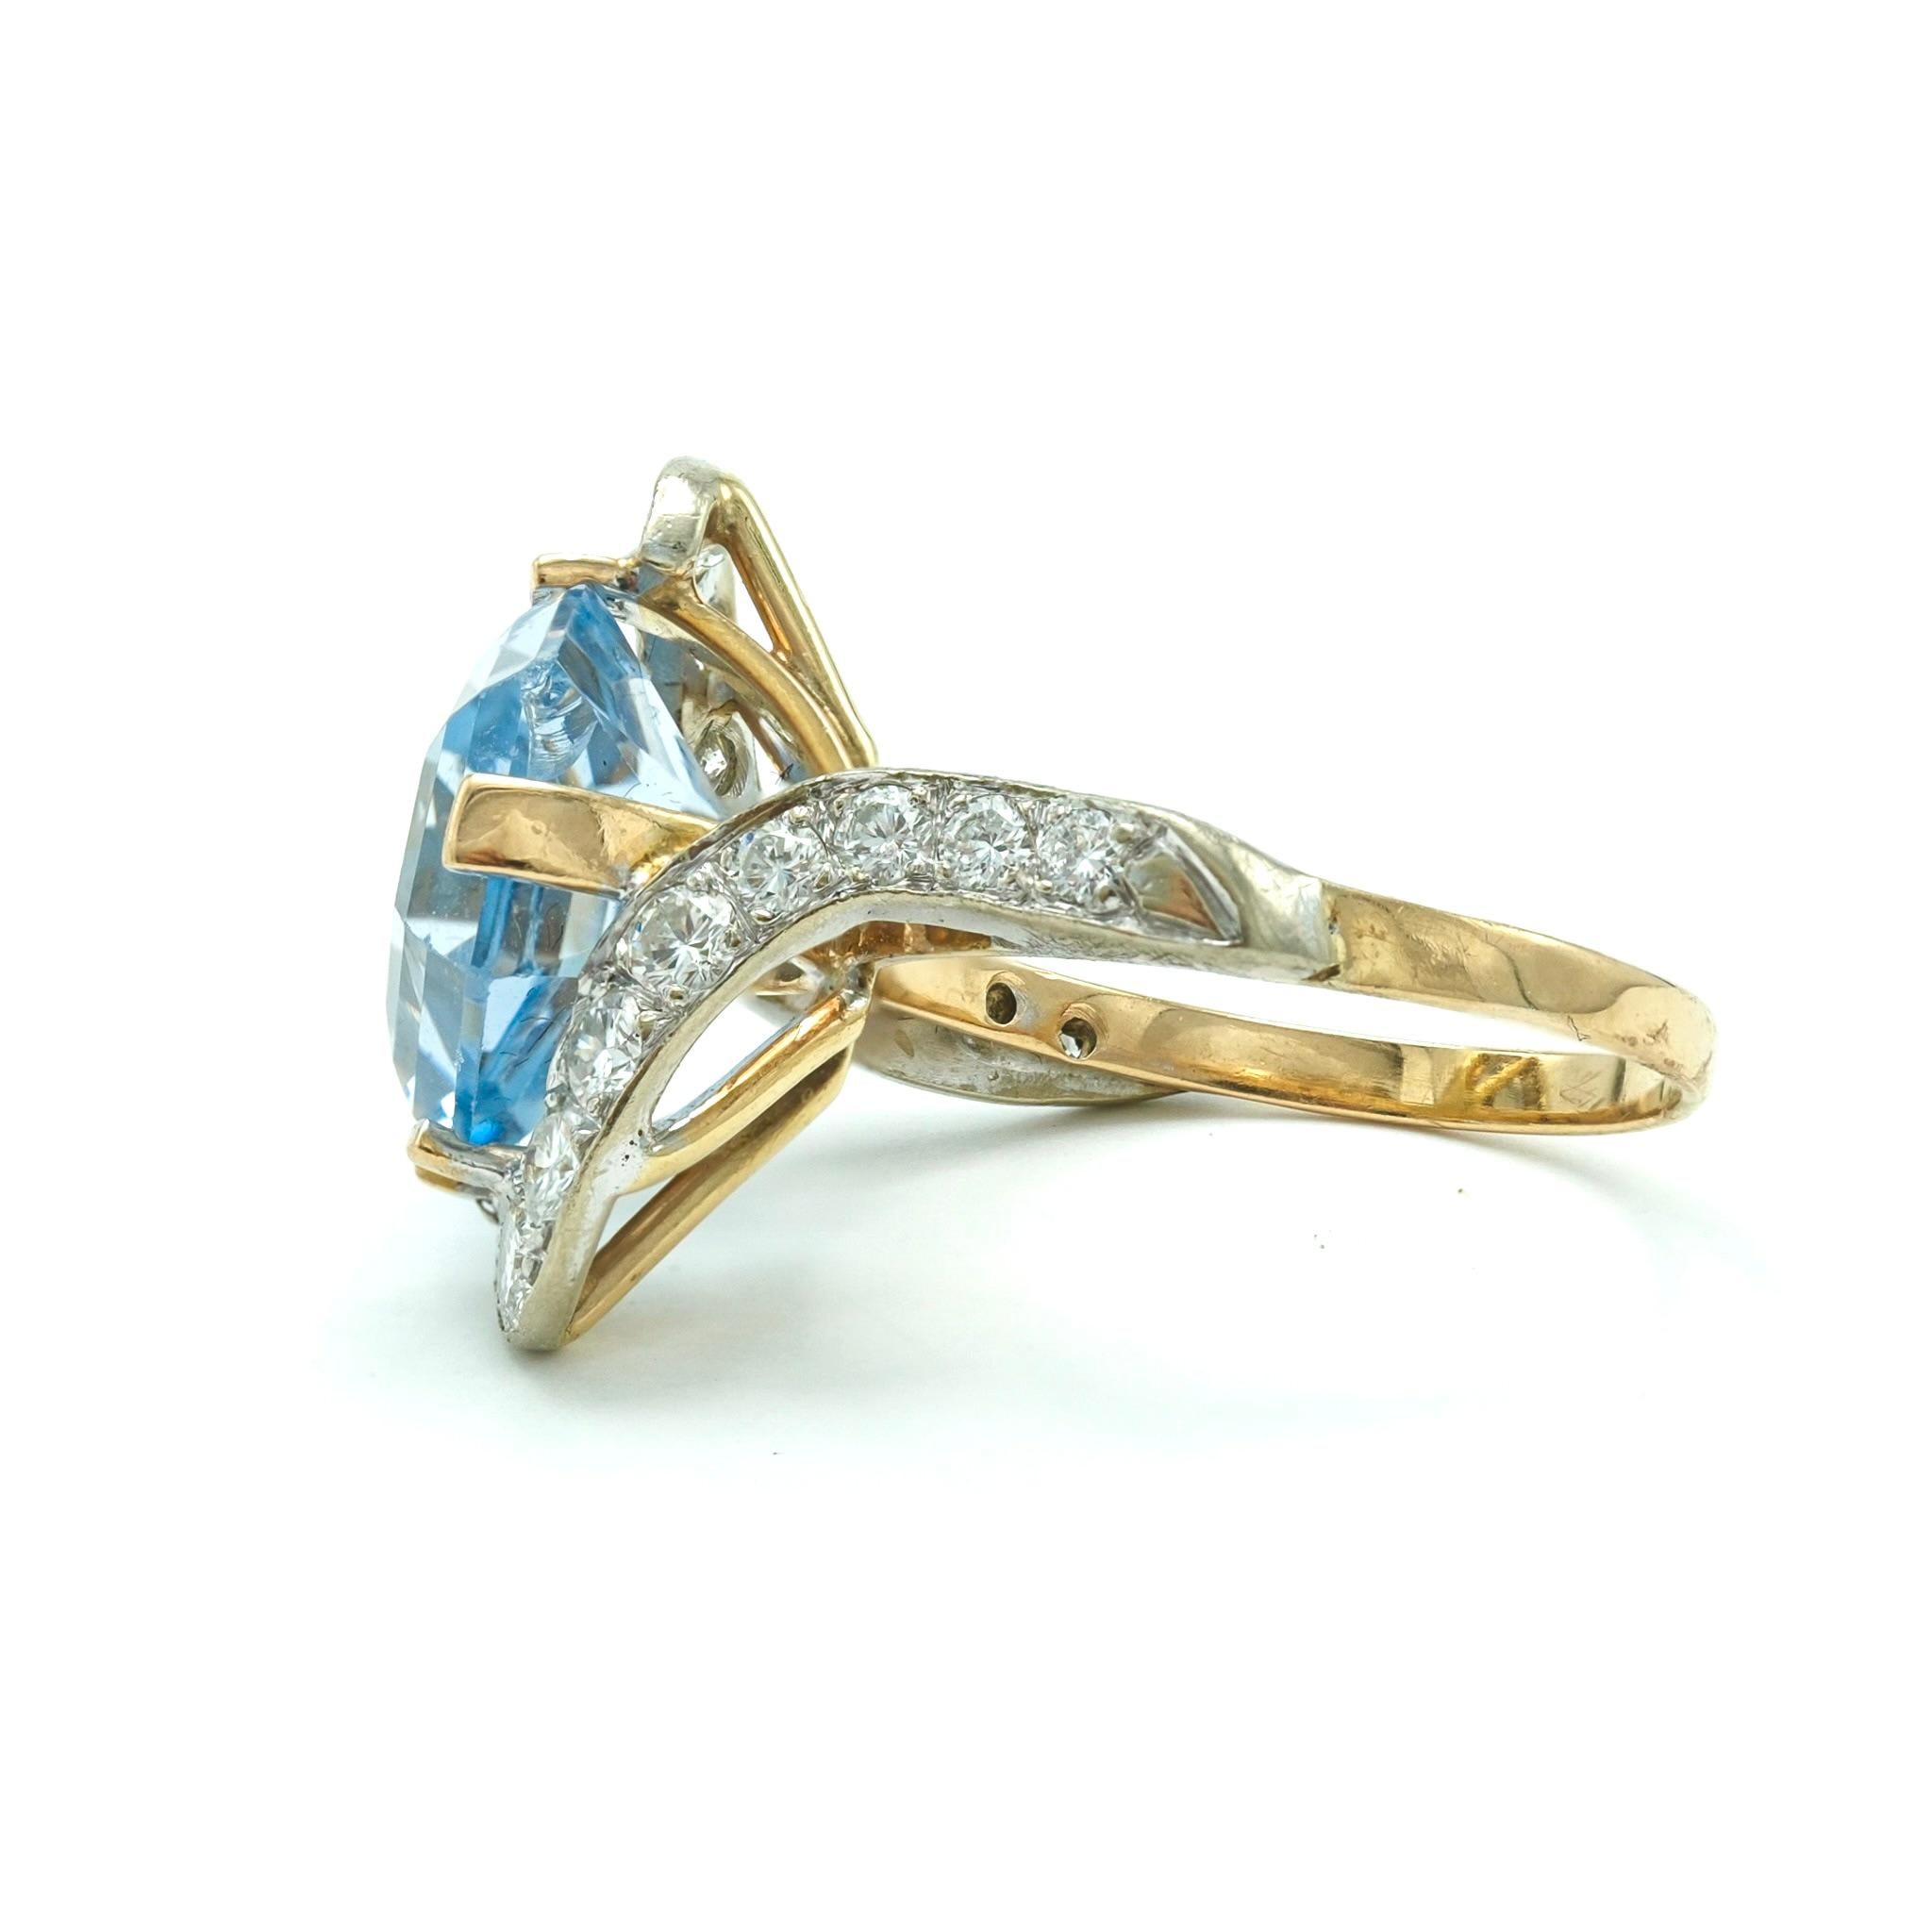 This ring, forged in 14 karat yellow gold, centers around a clear, 6.5 carat hexagonal topaz. On either side, a total of 16 diamonds, weighing in at 0.8 carats, set bright blue stone. The design brings together the bold presence of a cocktail ring